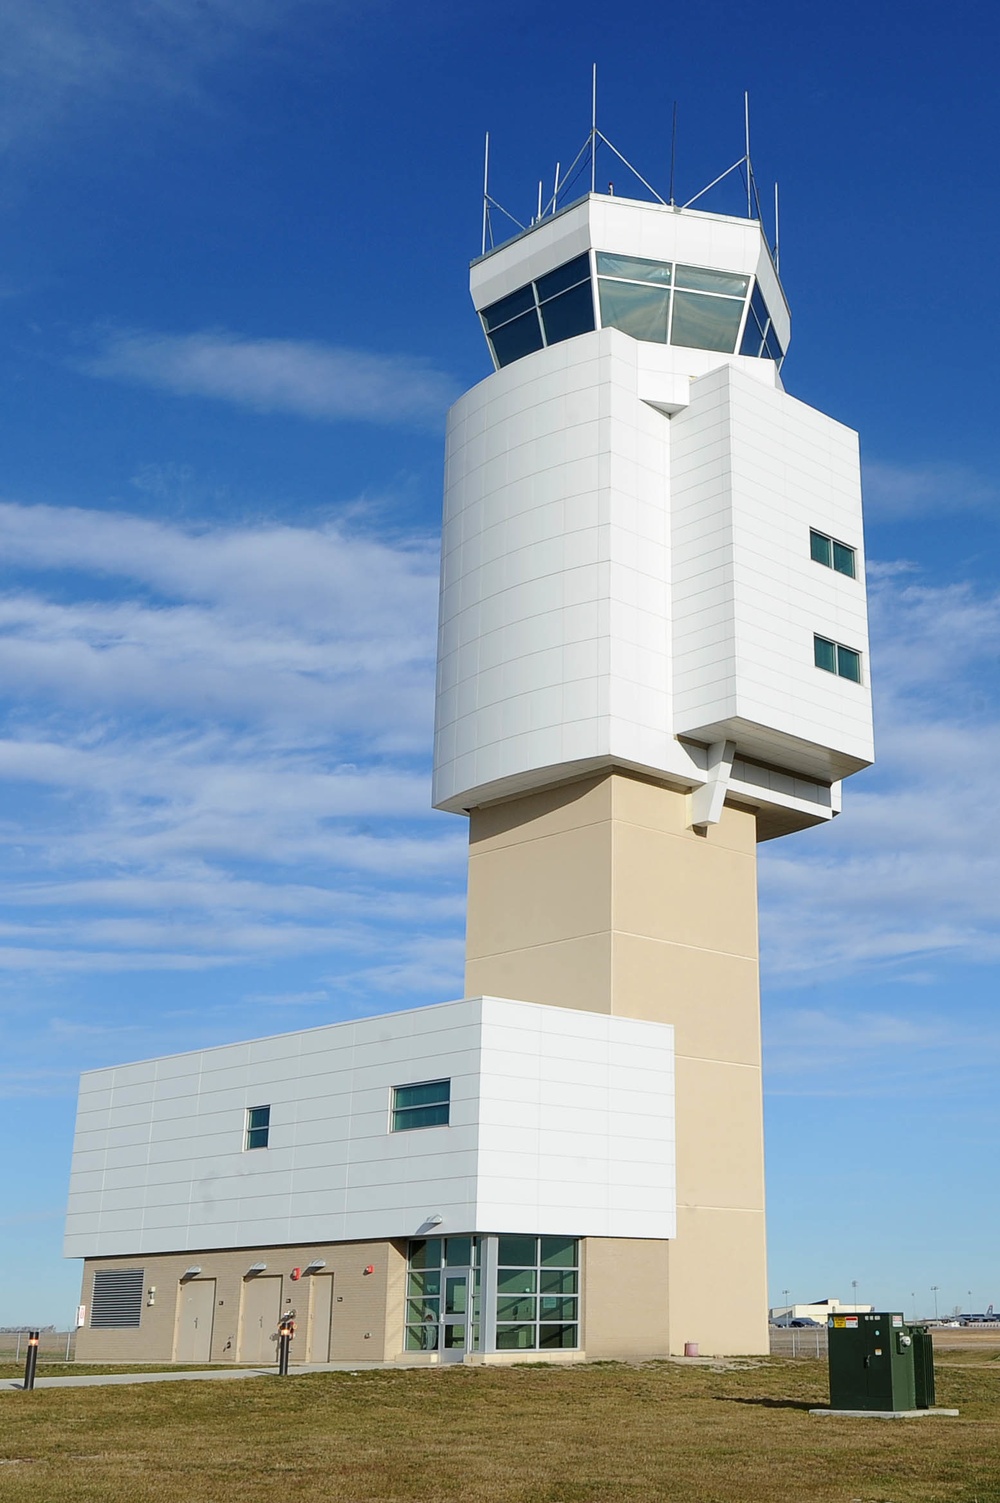 Eyes in the sky: 5 OSS Air Traffic Control